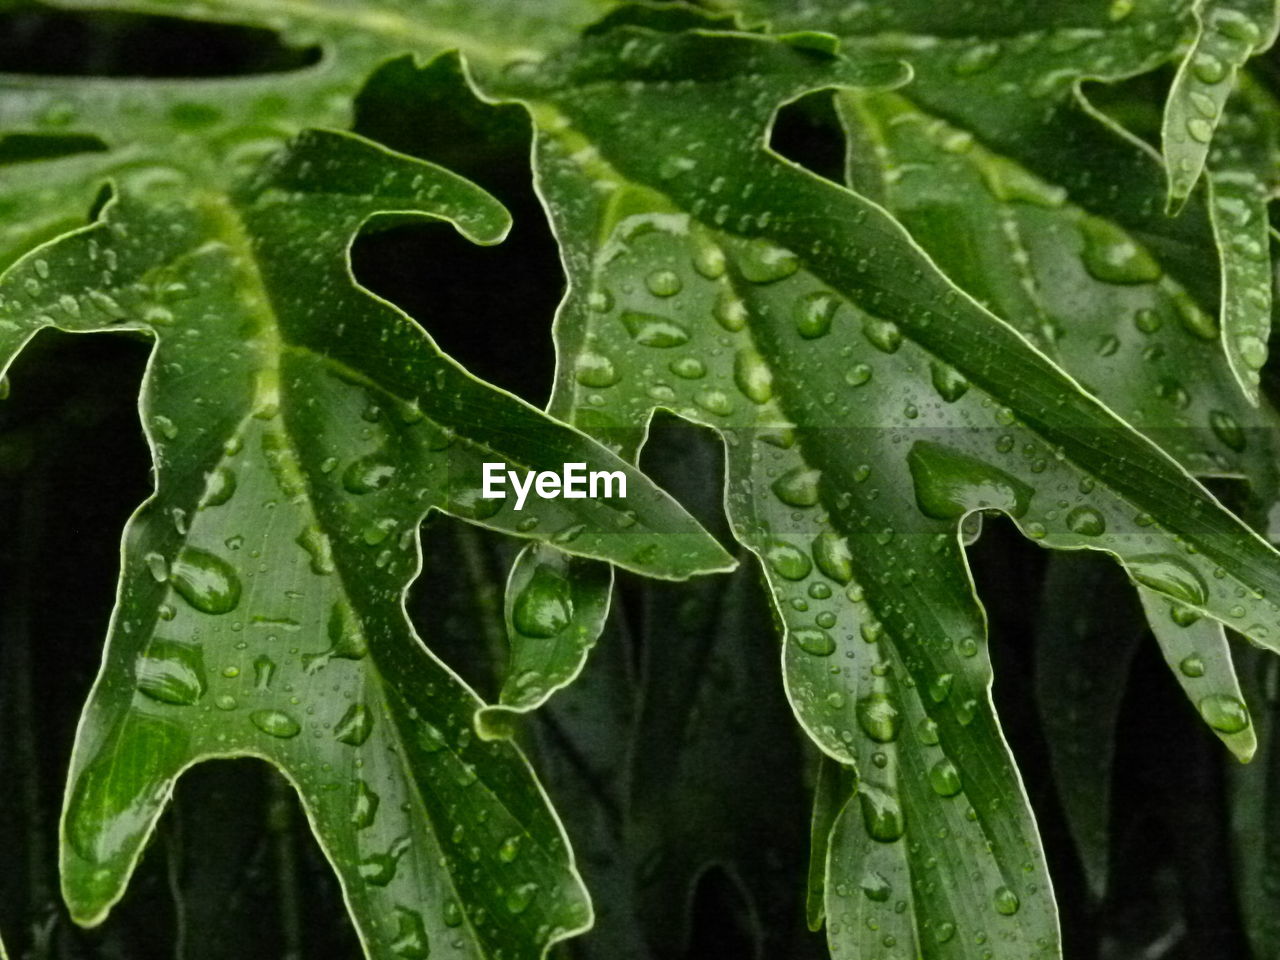 WATER DROPS ON LEAVES